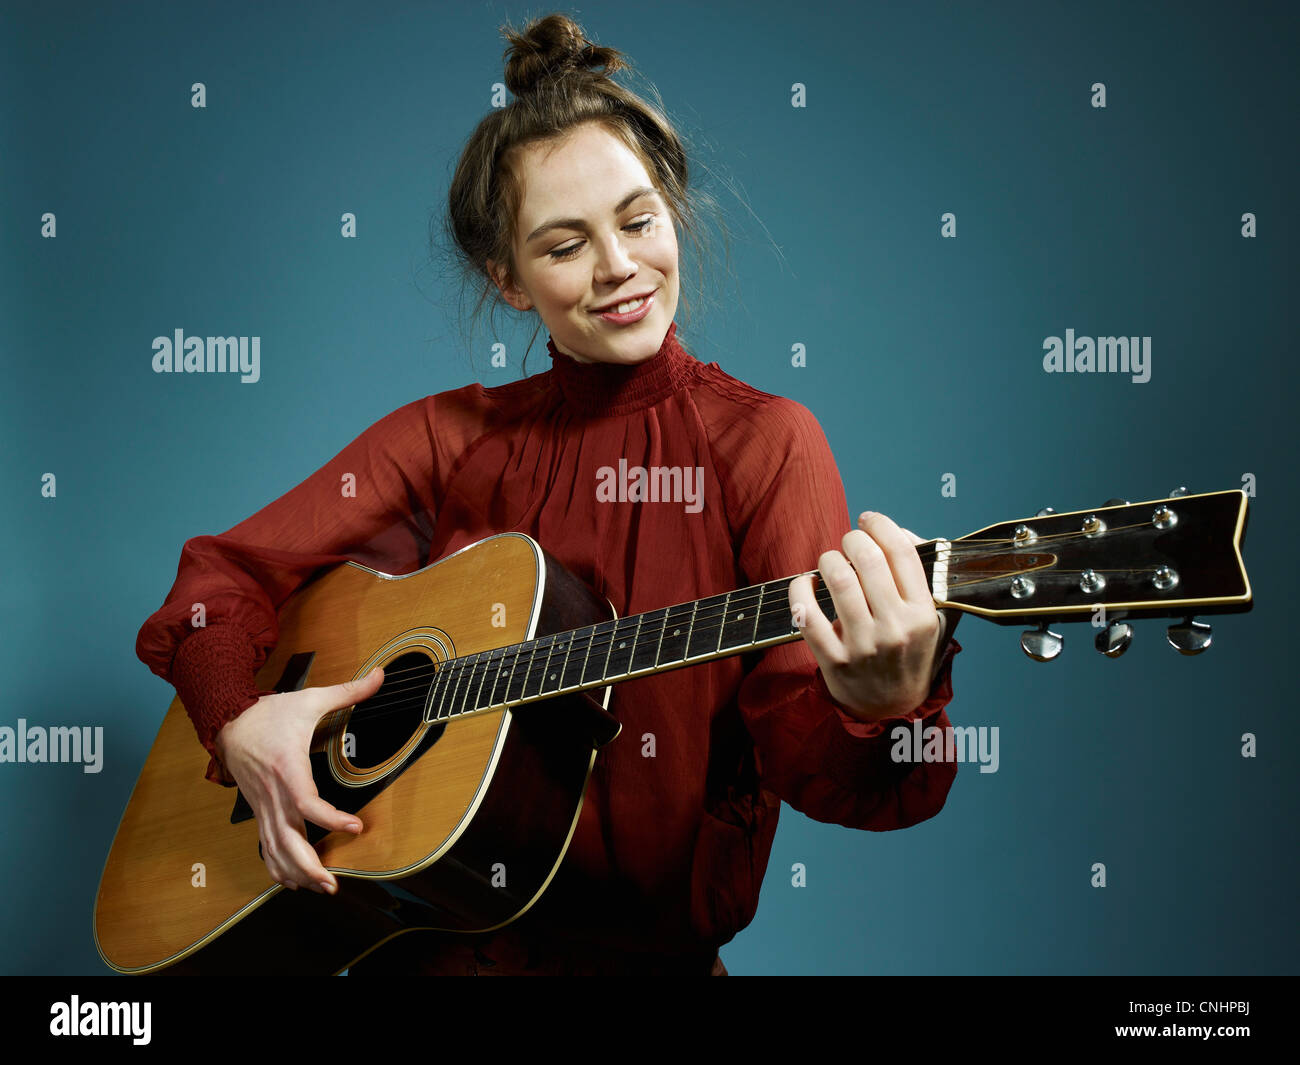 A young woman playing an acoustic guitar Stock Photo